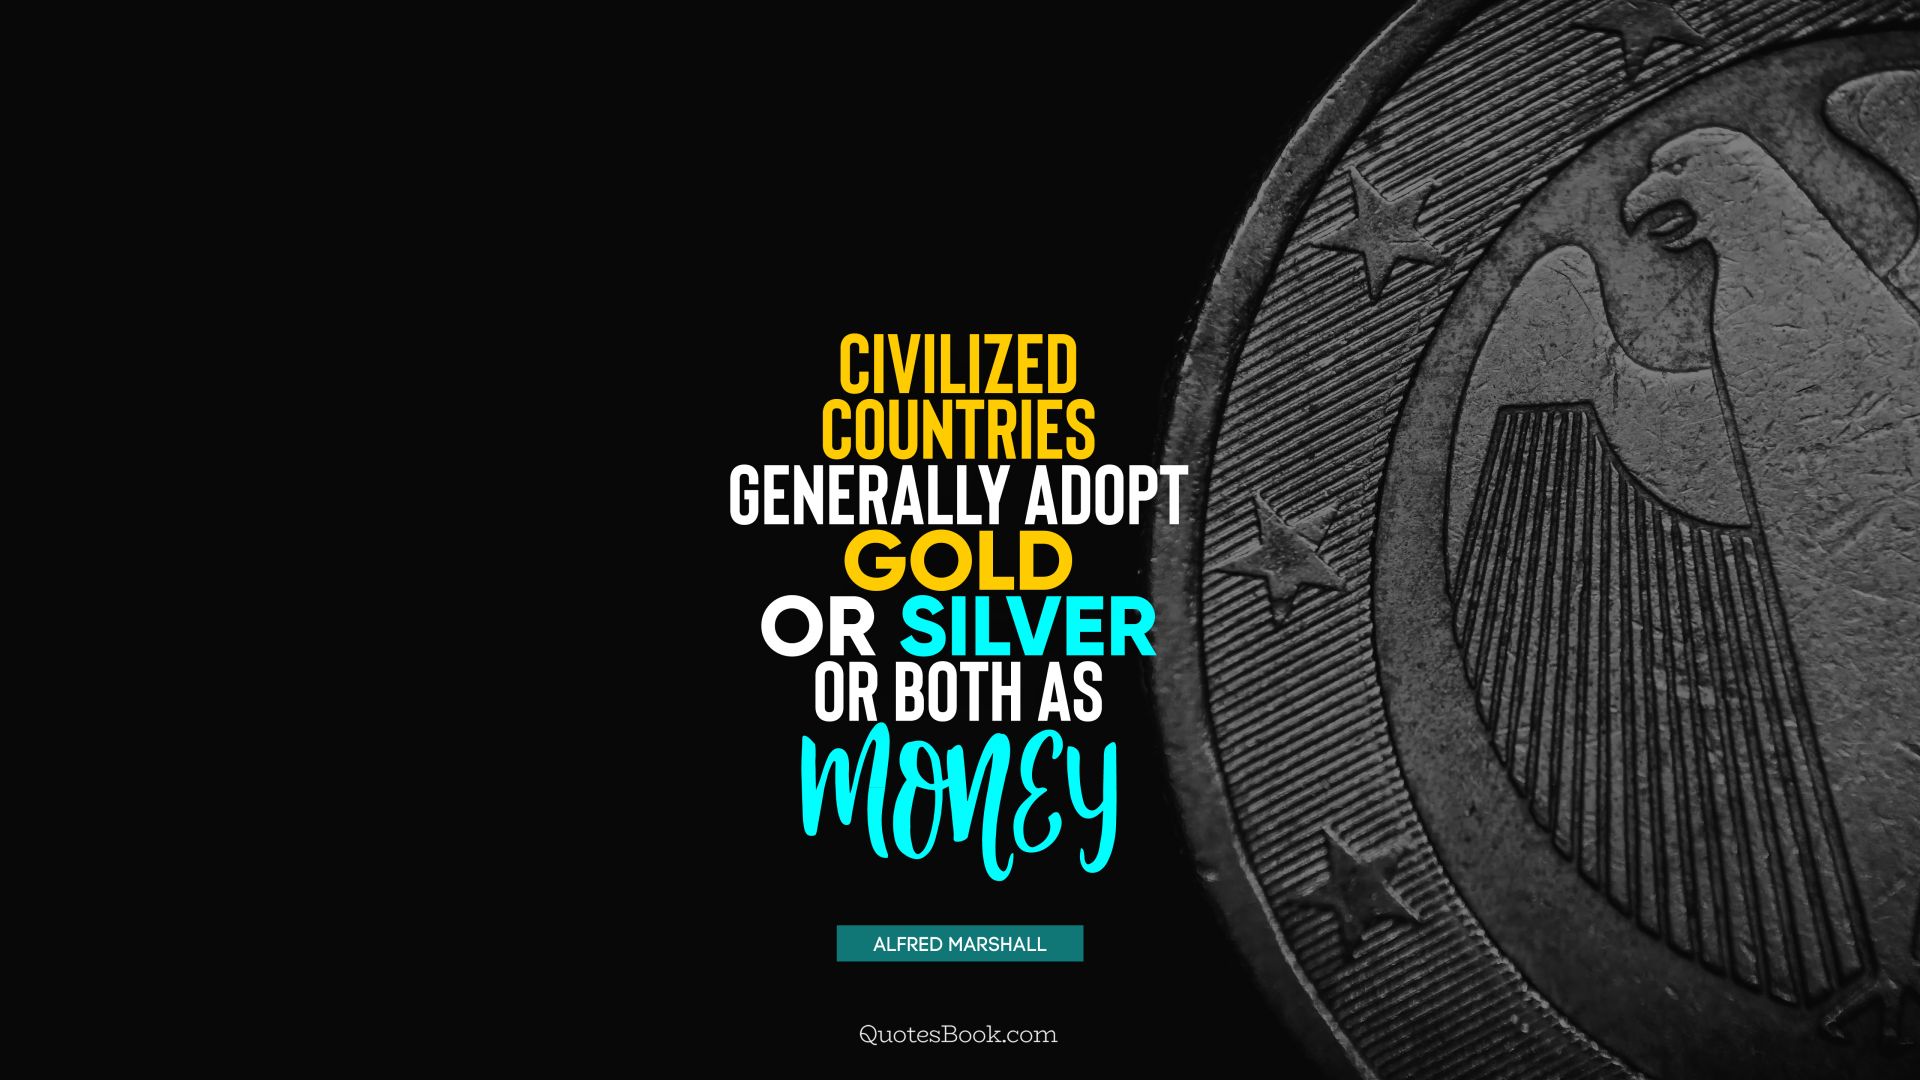 Civilized countries generally adopt gold or silver or both as money. - Quote by Alfred Marshall